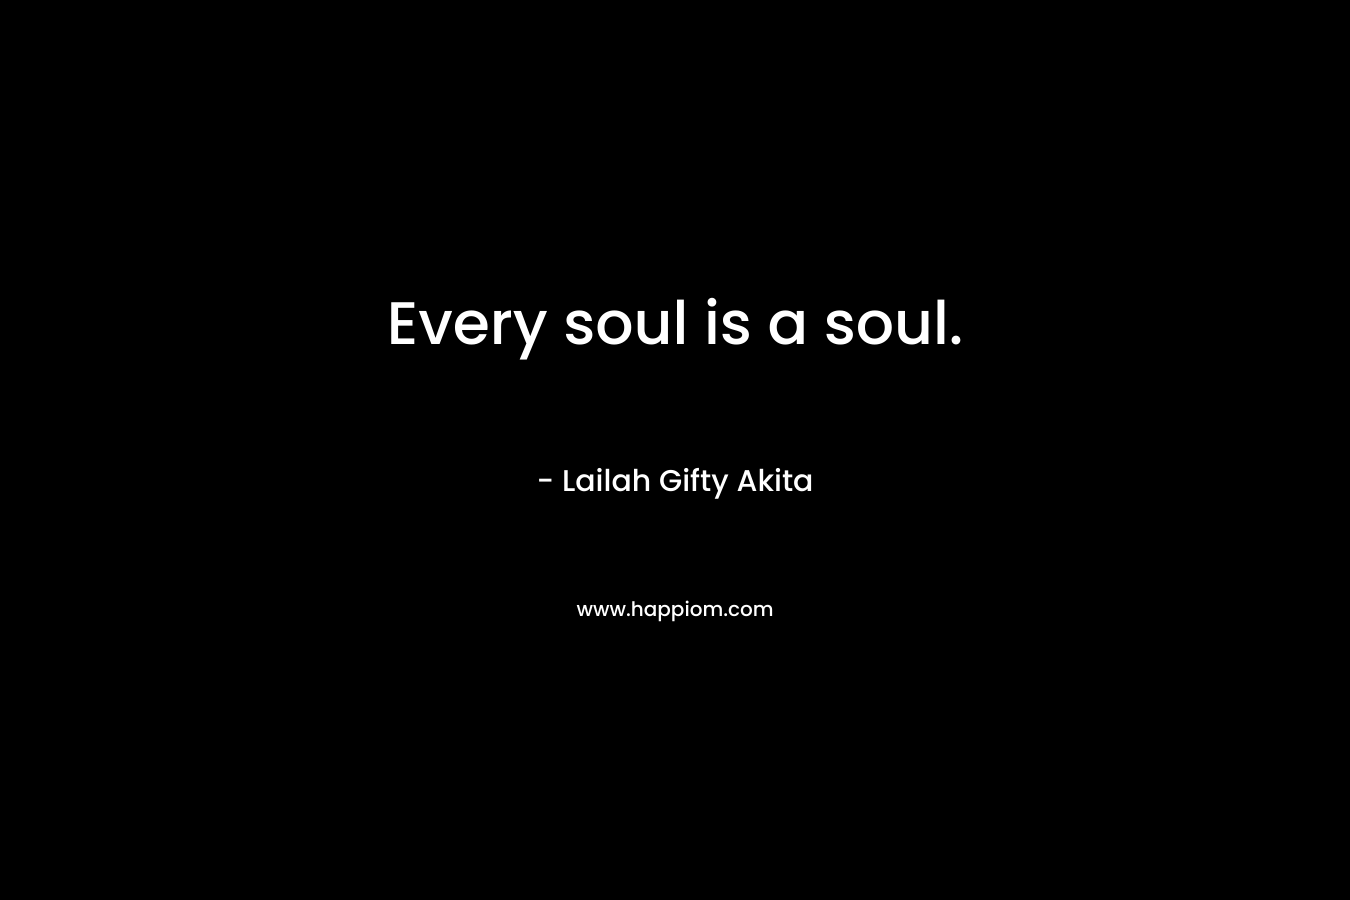 Every soul is a soul.